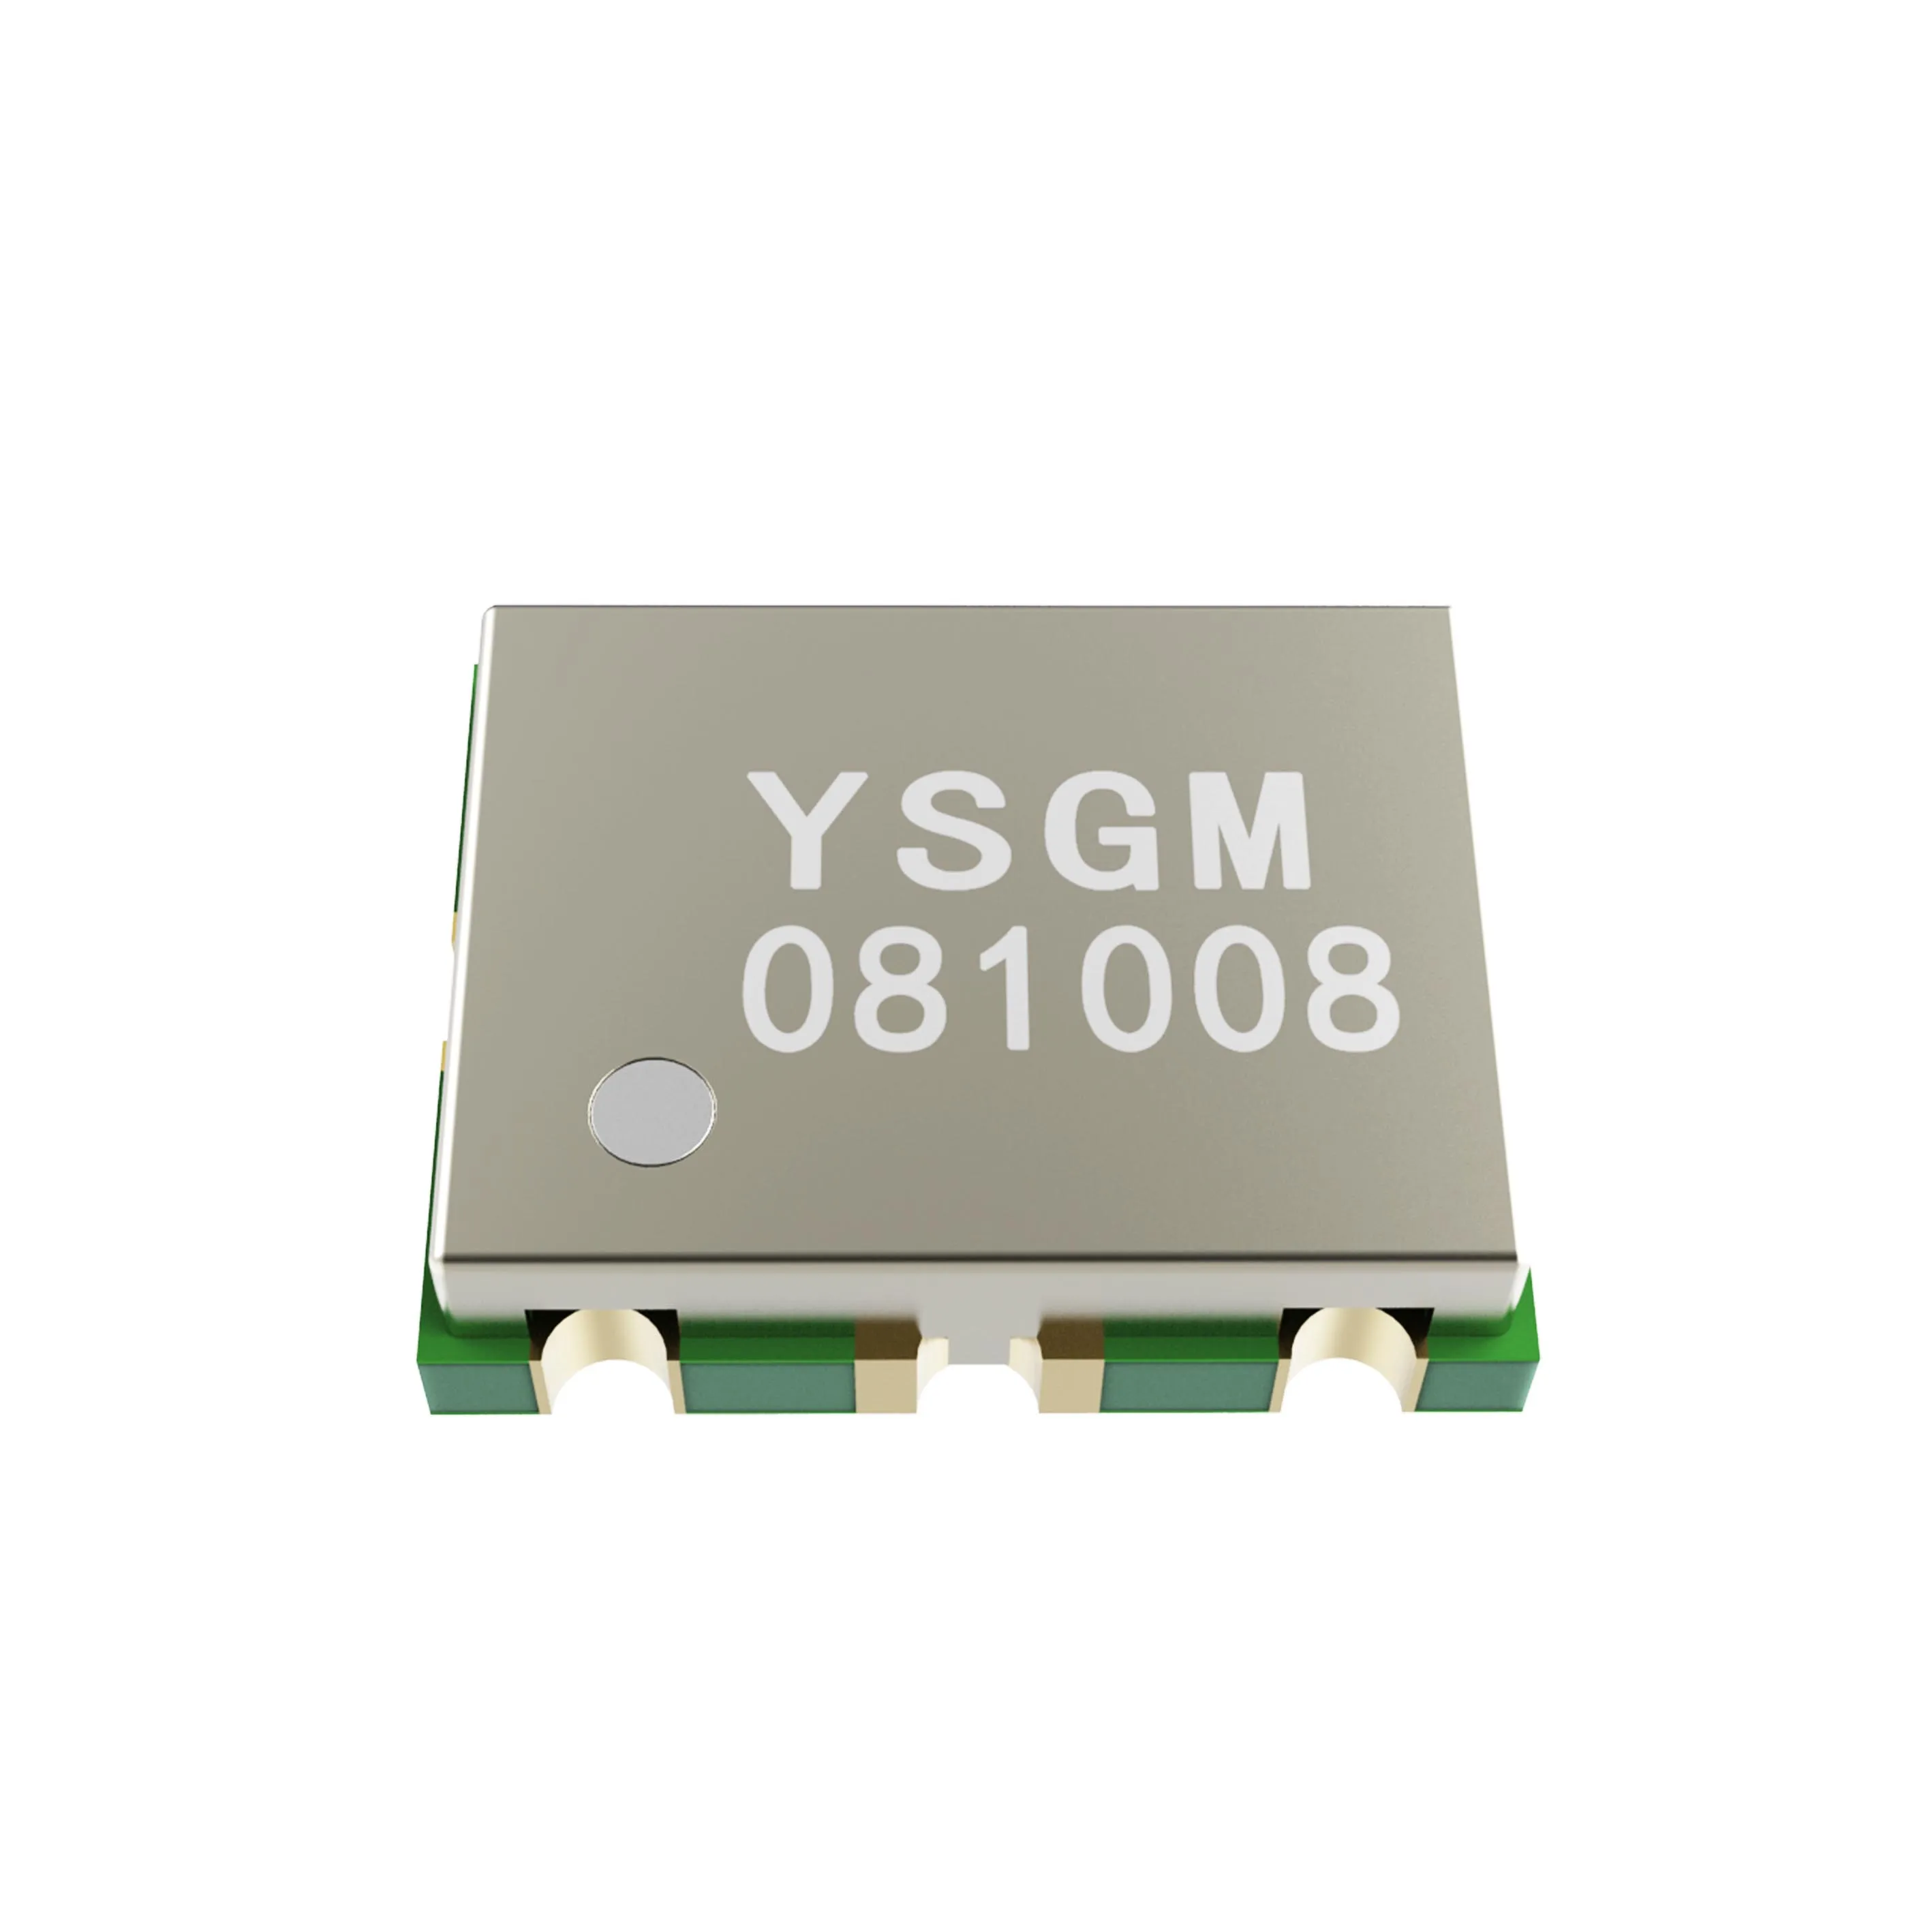 SZHUAHSI 100% New VCO Voltage Controlled Oscillator+ Buffer Amplifier For CDMA800(870-885MHz)&GSM900(930-960MHz)